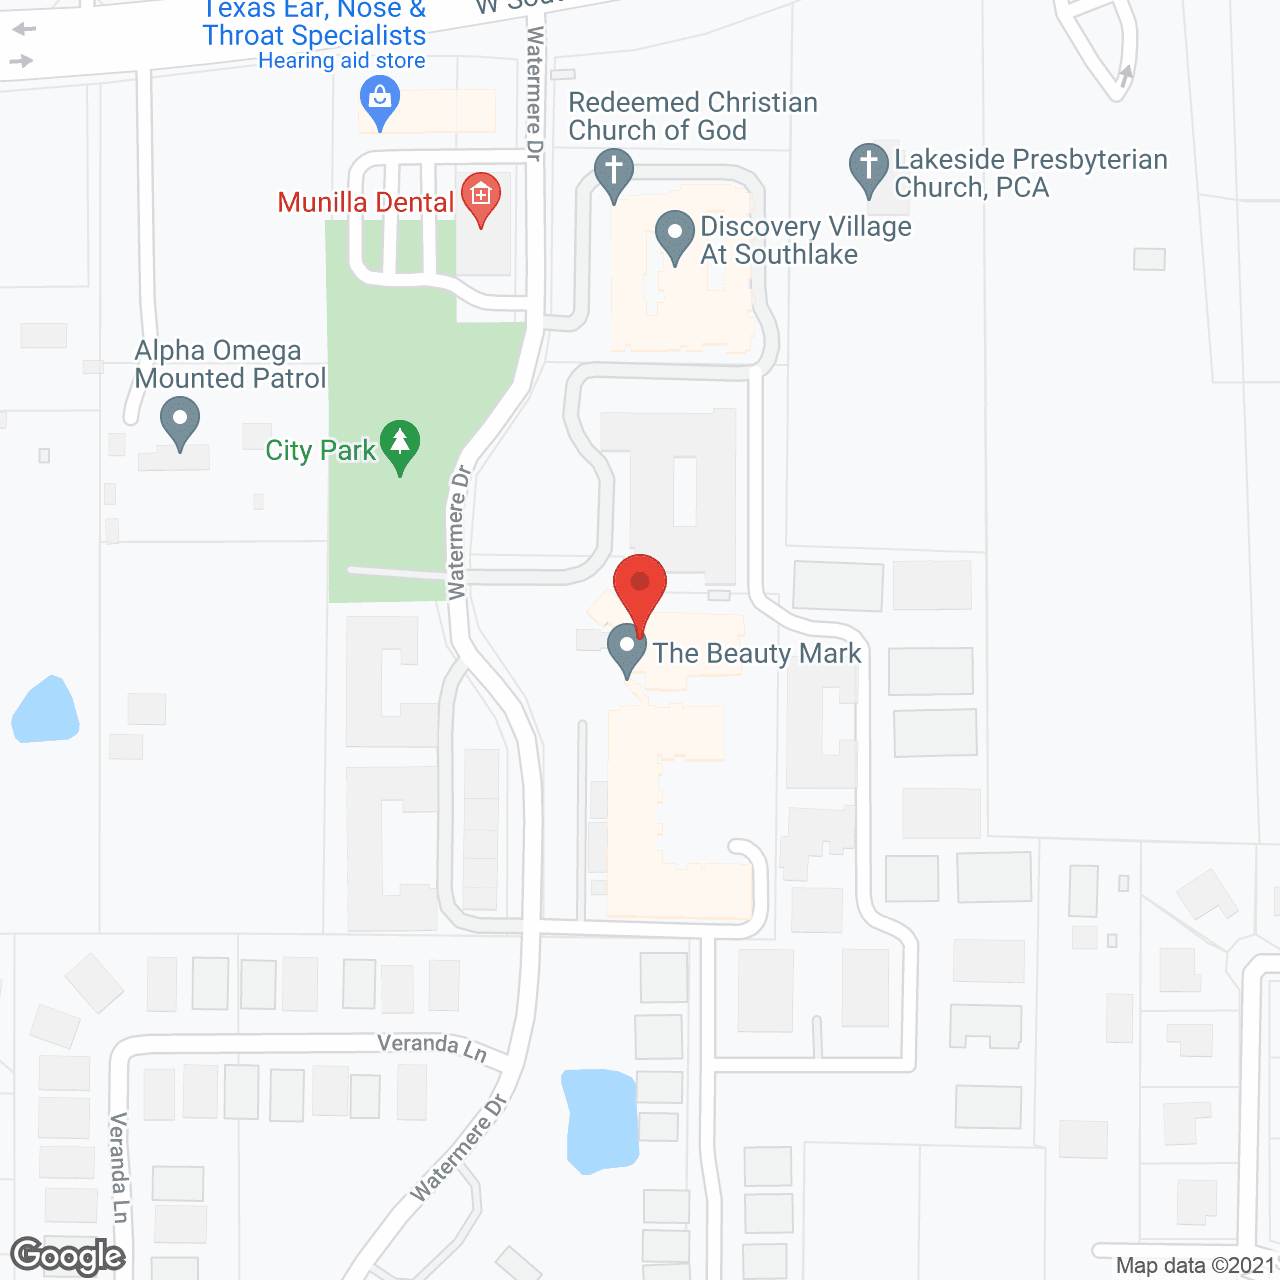 Discovery Village at Southlake AL/MC in google map